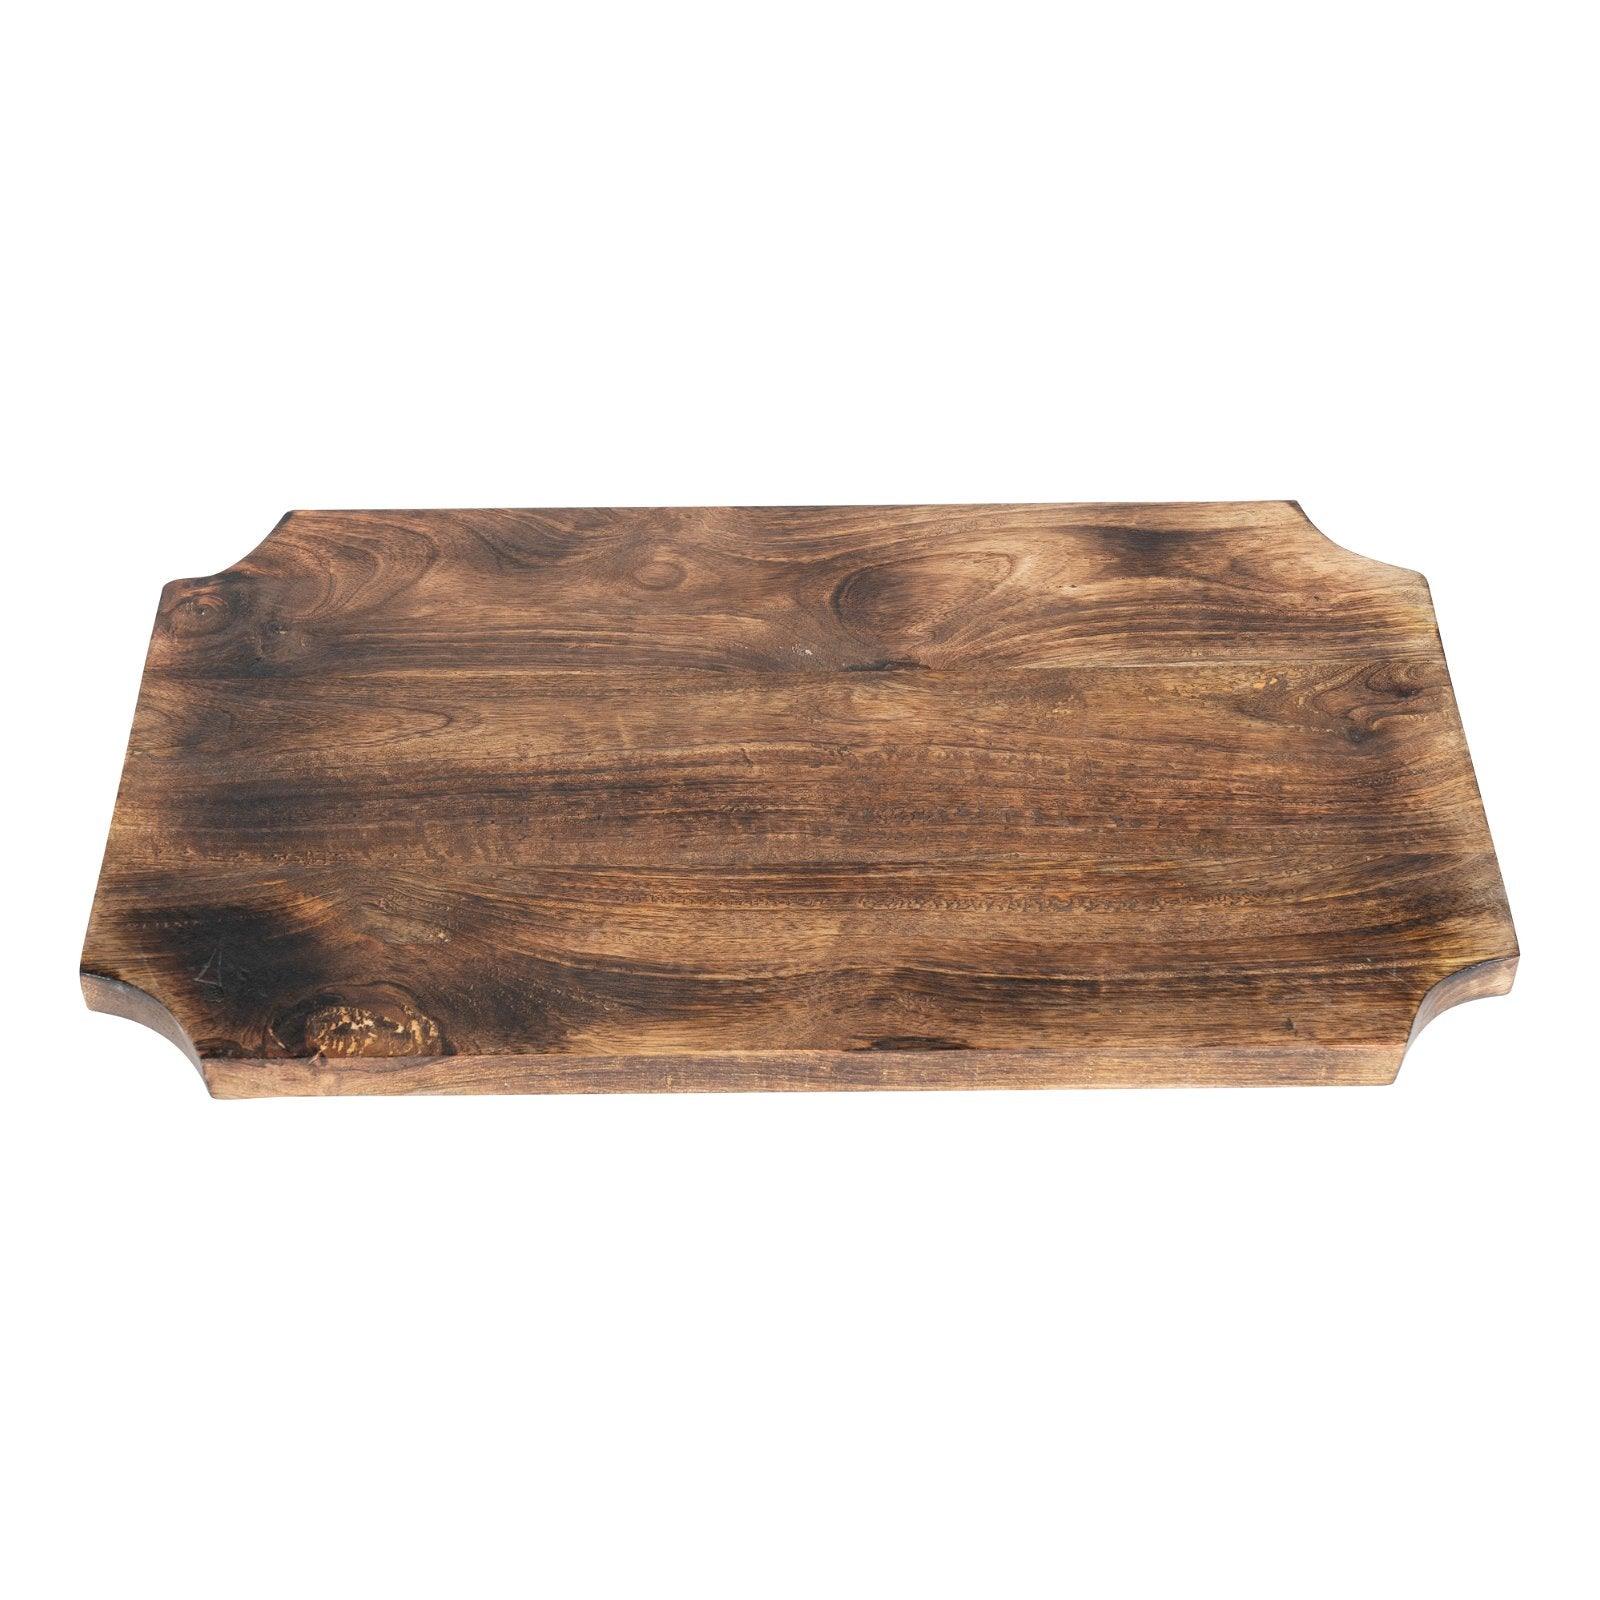 View Wooden Distressed Chopping Board On Legs 39cm information